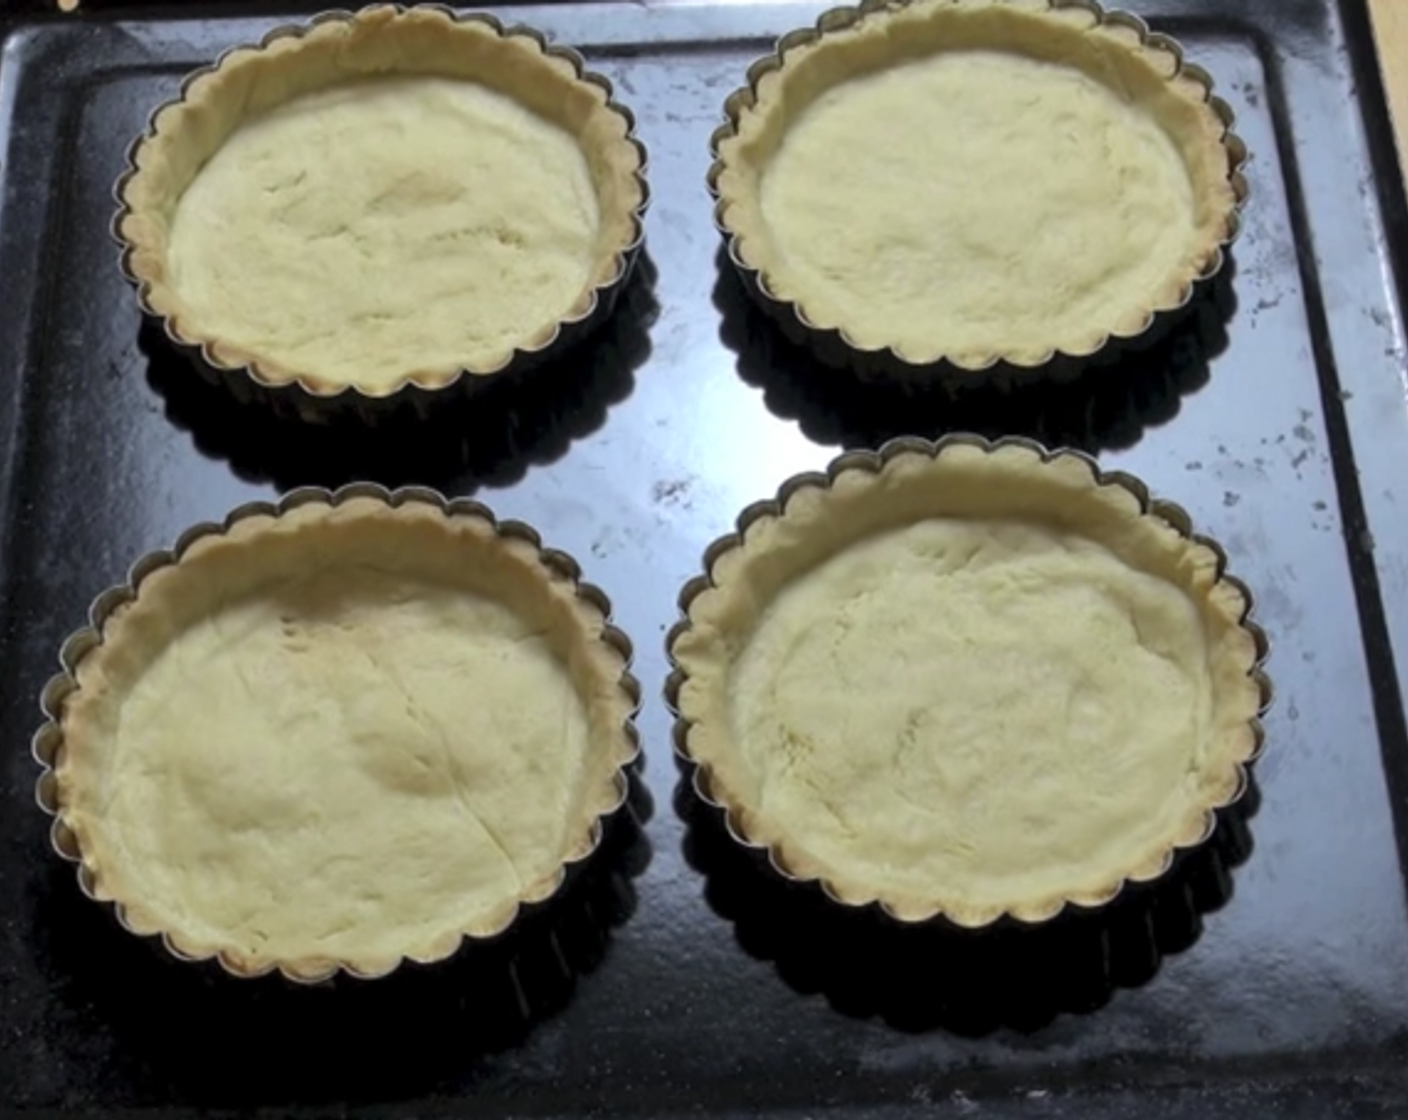 step 3 Using a rolling pin, flatten your dough until it is thin in thickness. Then, using your tart tins, cut out circular shapes from the dough, and press them into separate tart tins. Cover each tin with a baking paper, and bake under 180 degrees C (350 degrees F) for about 15 minutes.